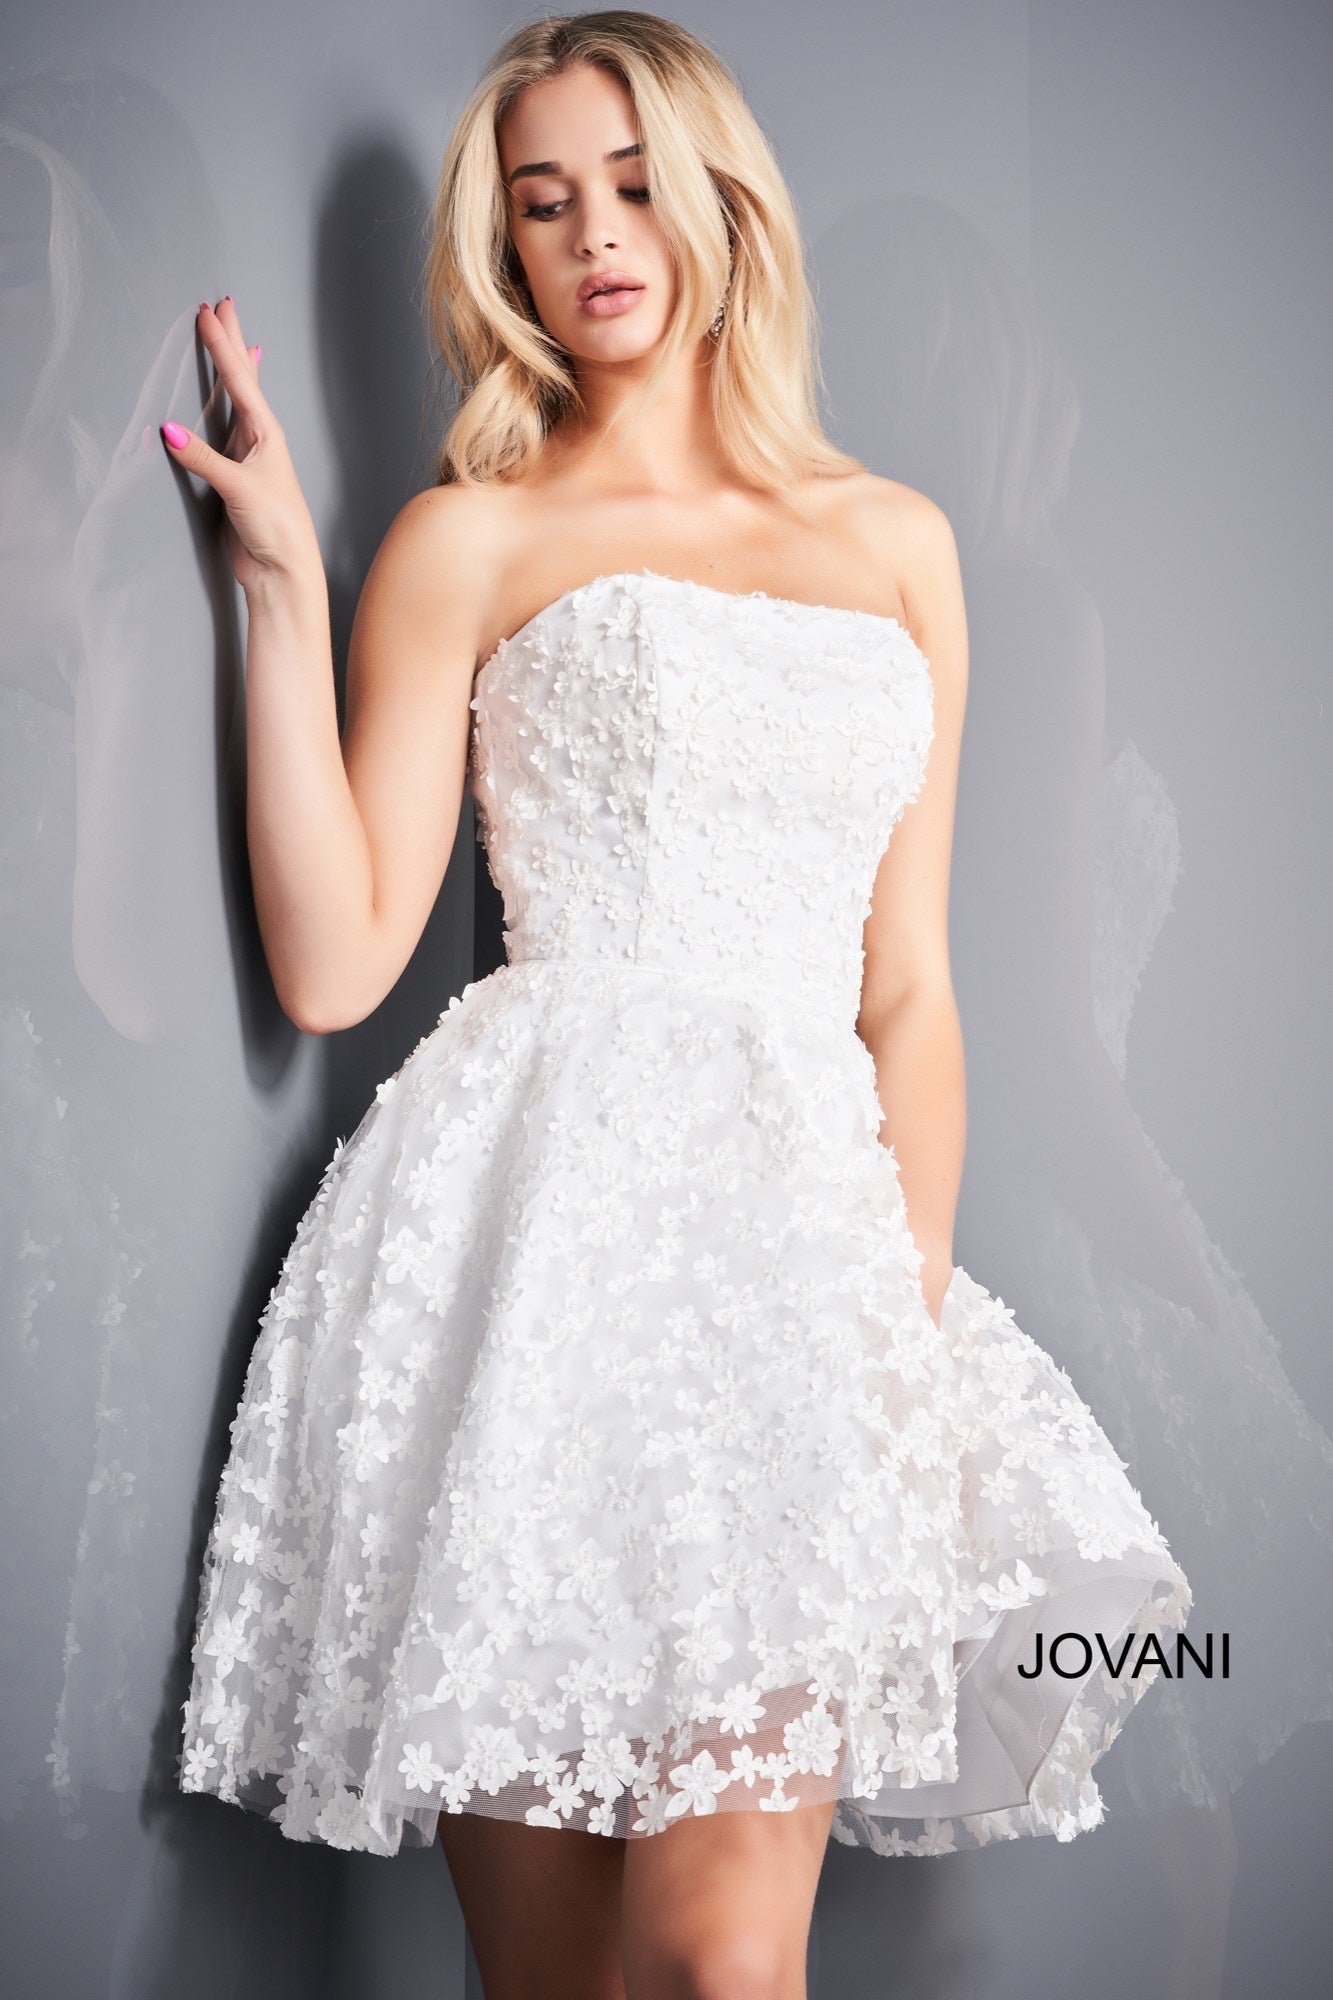 Jovani 02564 is a short Fit & Flare cocktail dress perfect for homecoming, wedding reception, prom & More! Strapless straight neckline with a fitted bodice covered in 3D floral Appliques. Pockets in the flared skirt. Corset Lace up back.  Available Sizes: 00,0,2,4,6,8,10,12,14,16,18,20,22,24  Available Colors: White